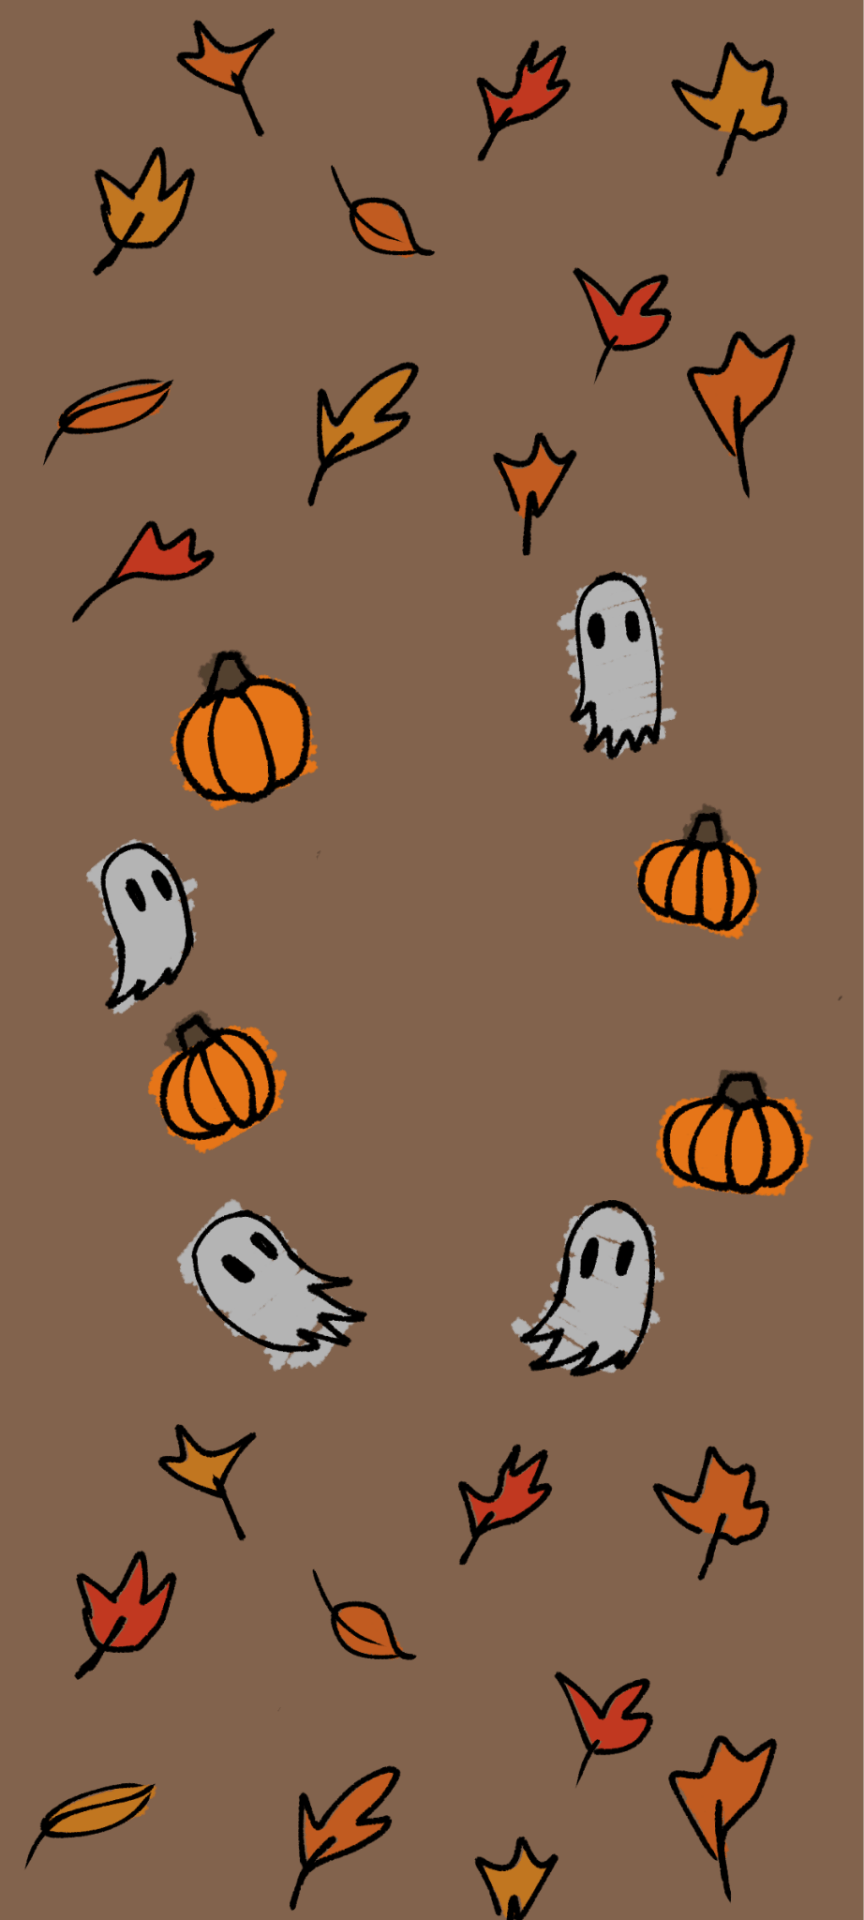 Halloween wallpaper with ghosts, pumpkins, and leaves - Halloween